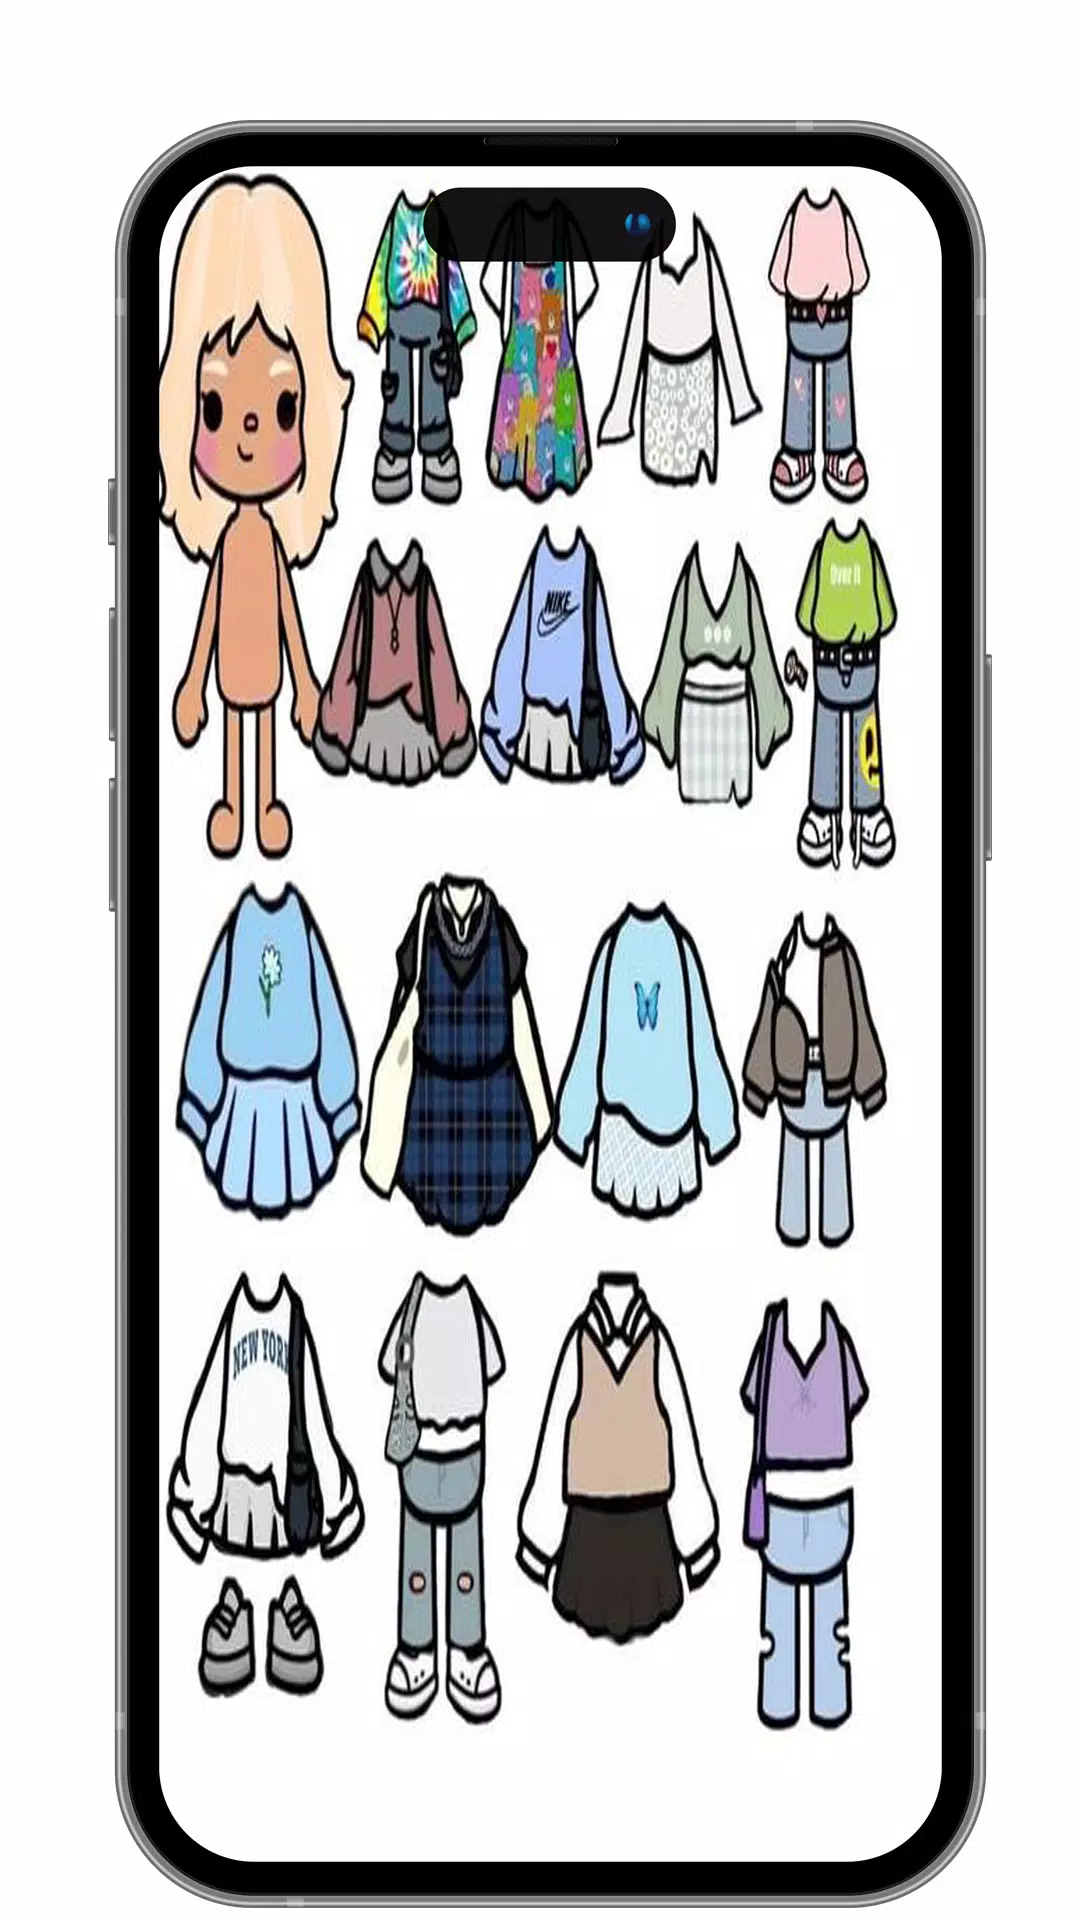 Toca boca Paper Doll Ideas - Apps on Google Play